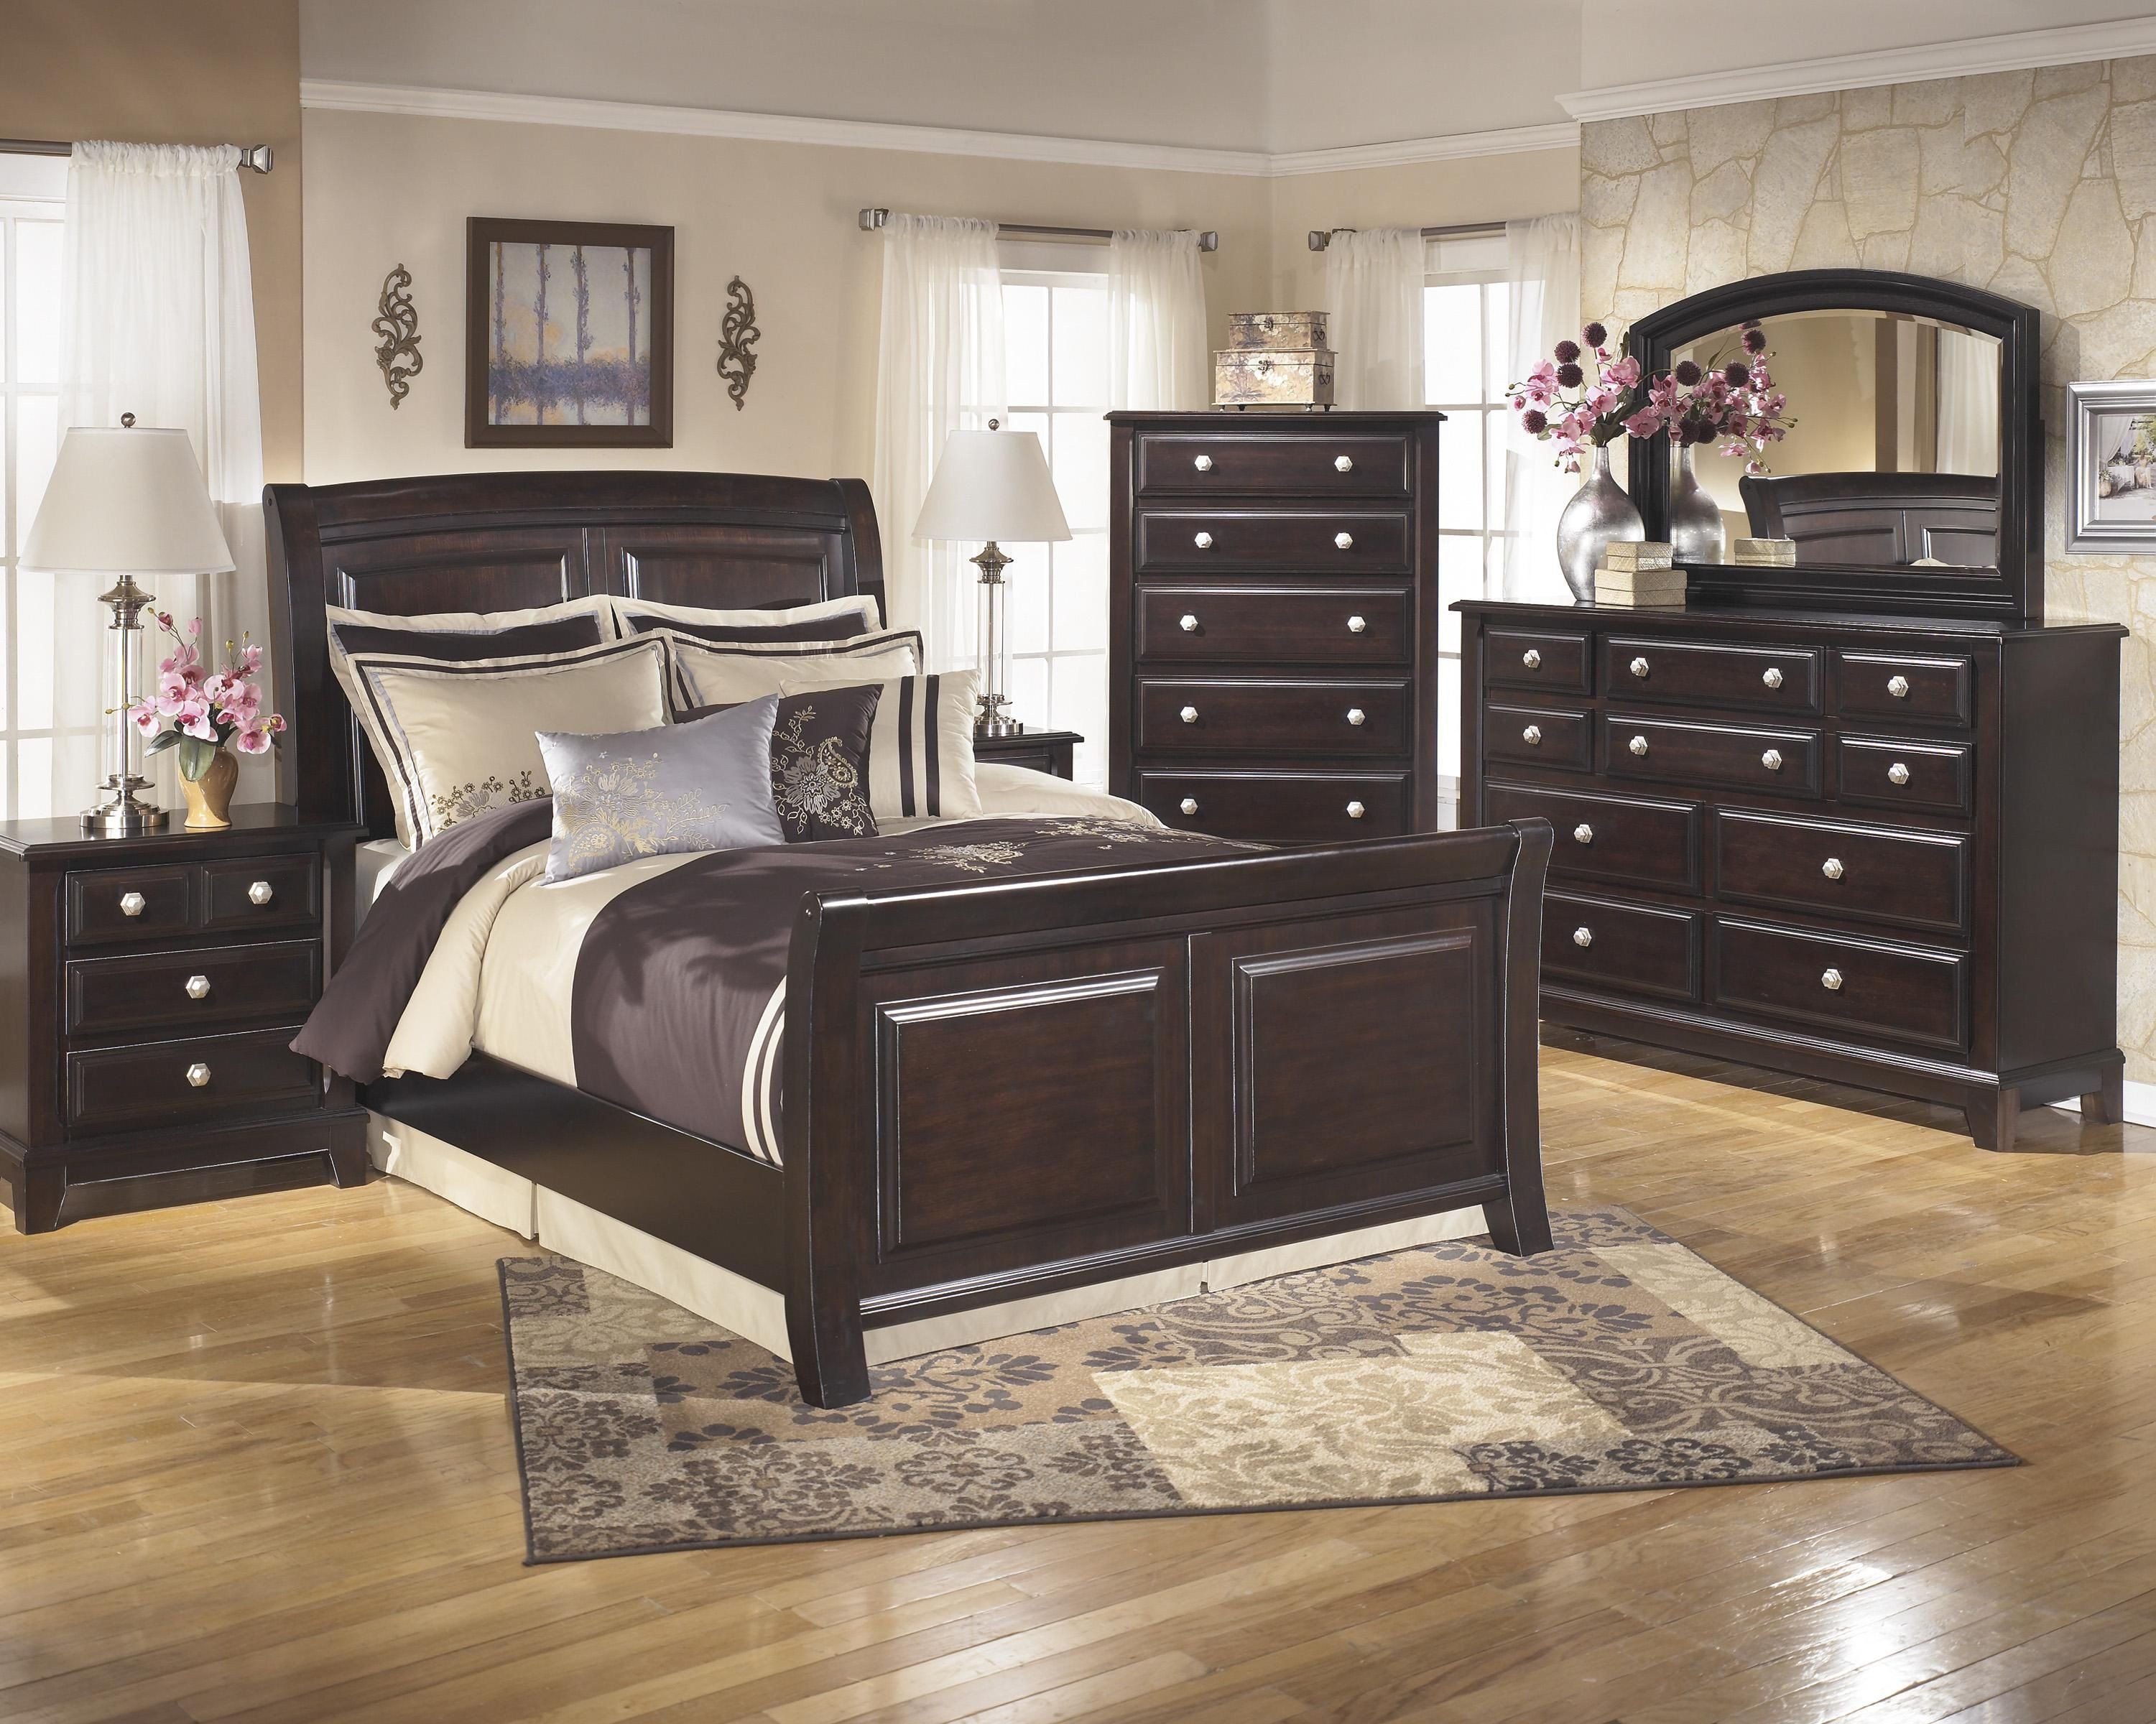 King Bedroom Set with Mattress Elegant Ridgley King Bedroom Group by Signature Design by ashley